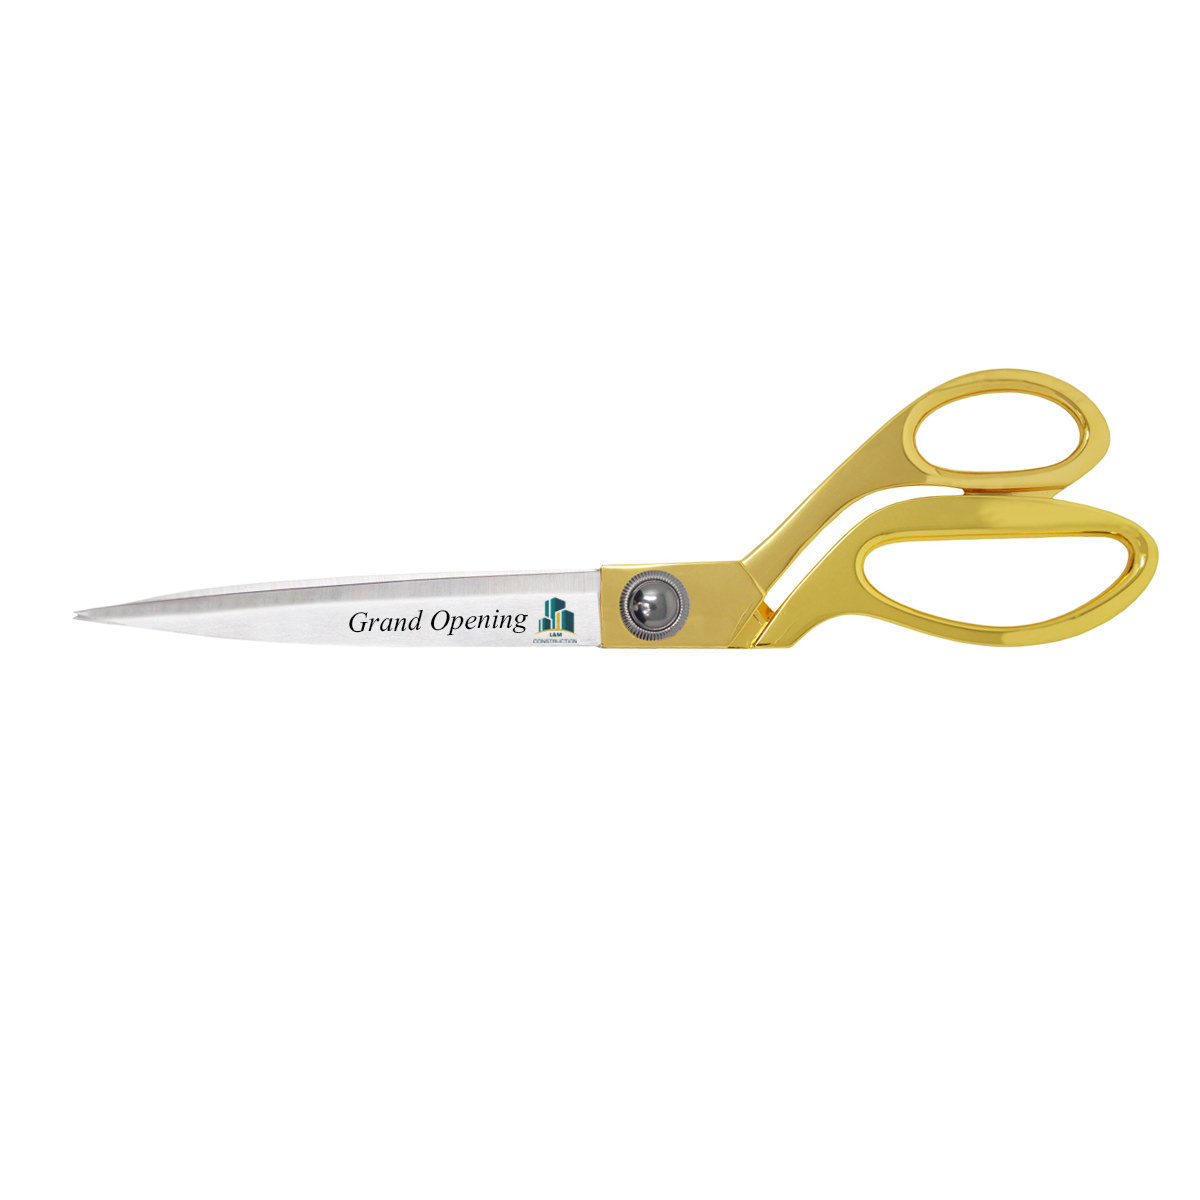 The Largest Ceremonial Scissors in the World - 40 inches - Golden